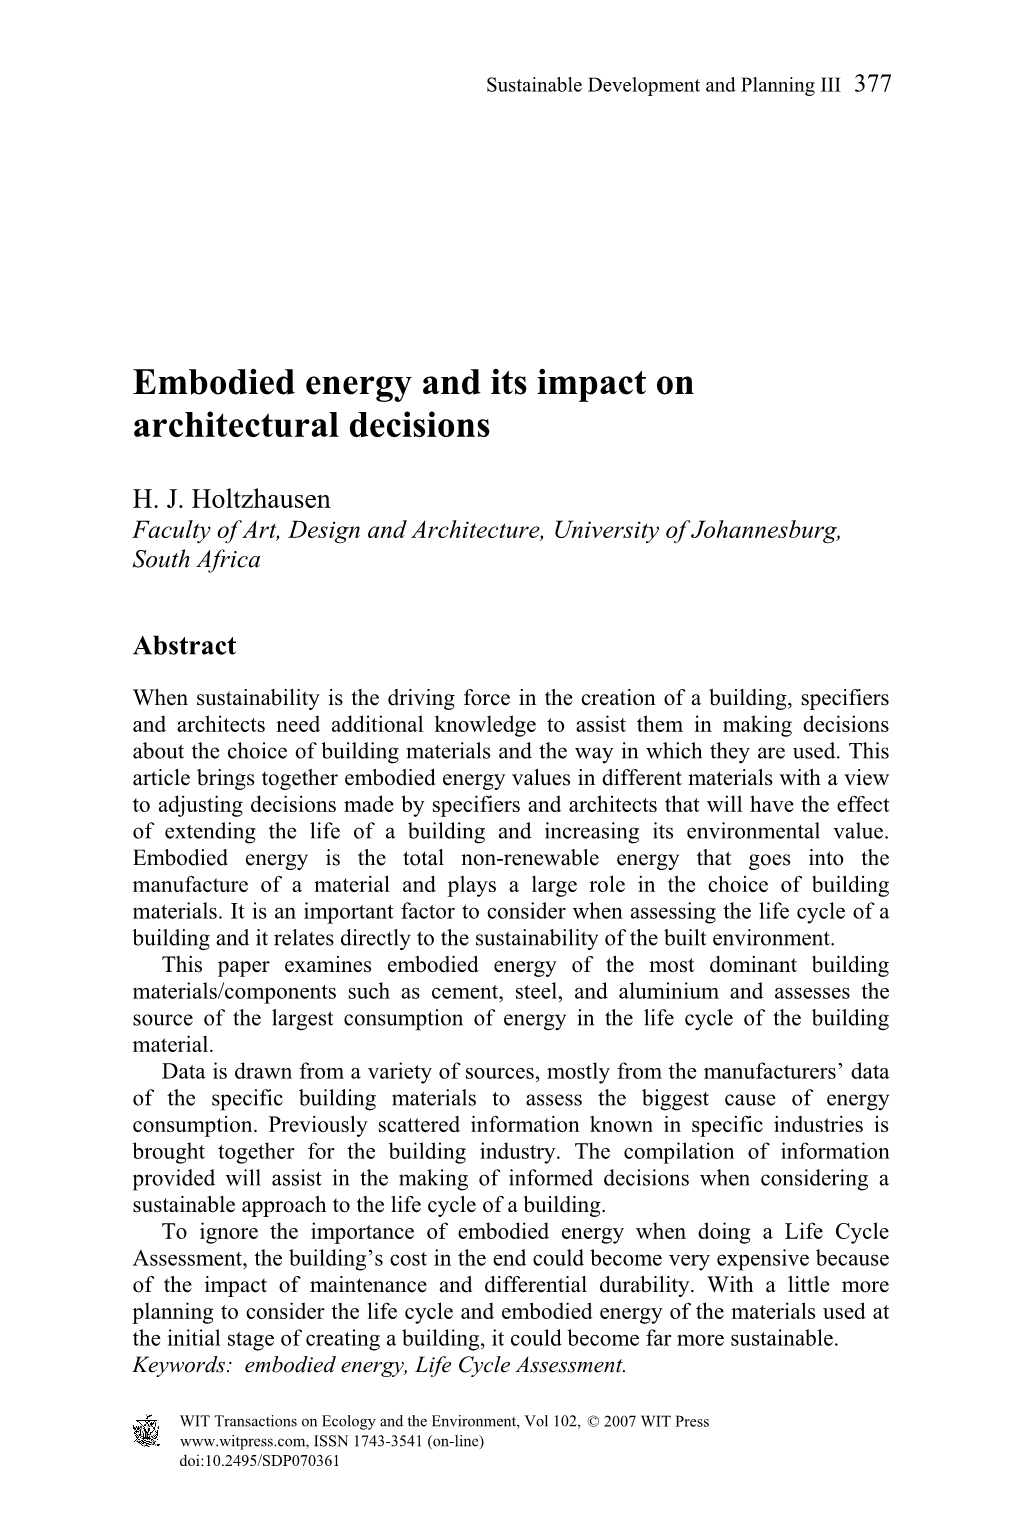 Embodied Energy and Its Impact on Architectural Decisions